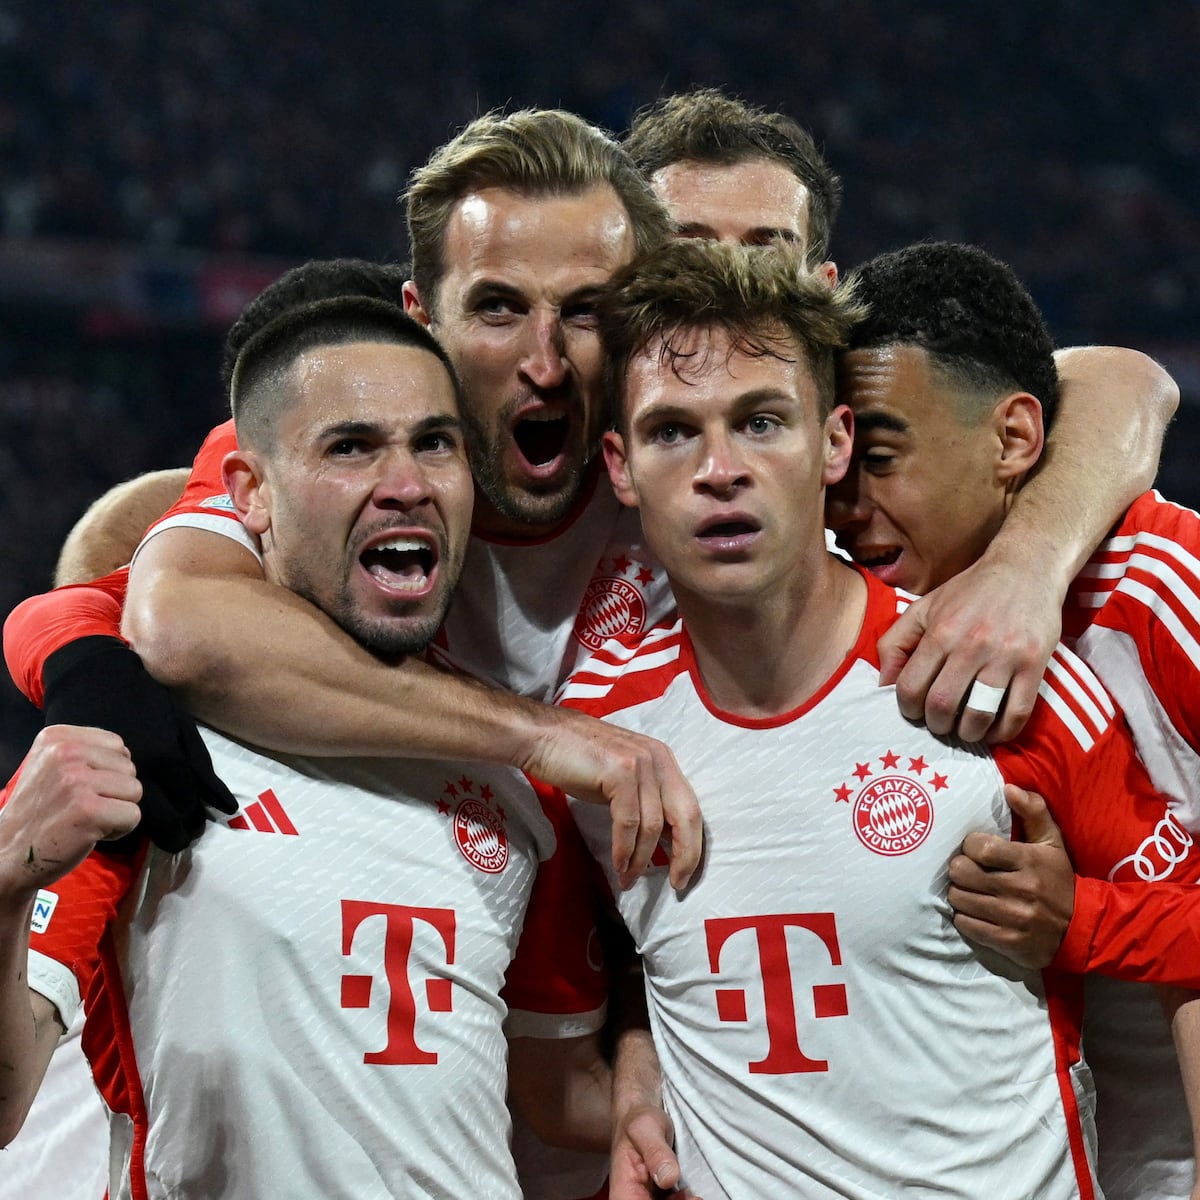 Bayern Munich vs Real Madrid: Starting XI and Substitutes for Champions League Semifinal - Previous Matches Stats